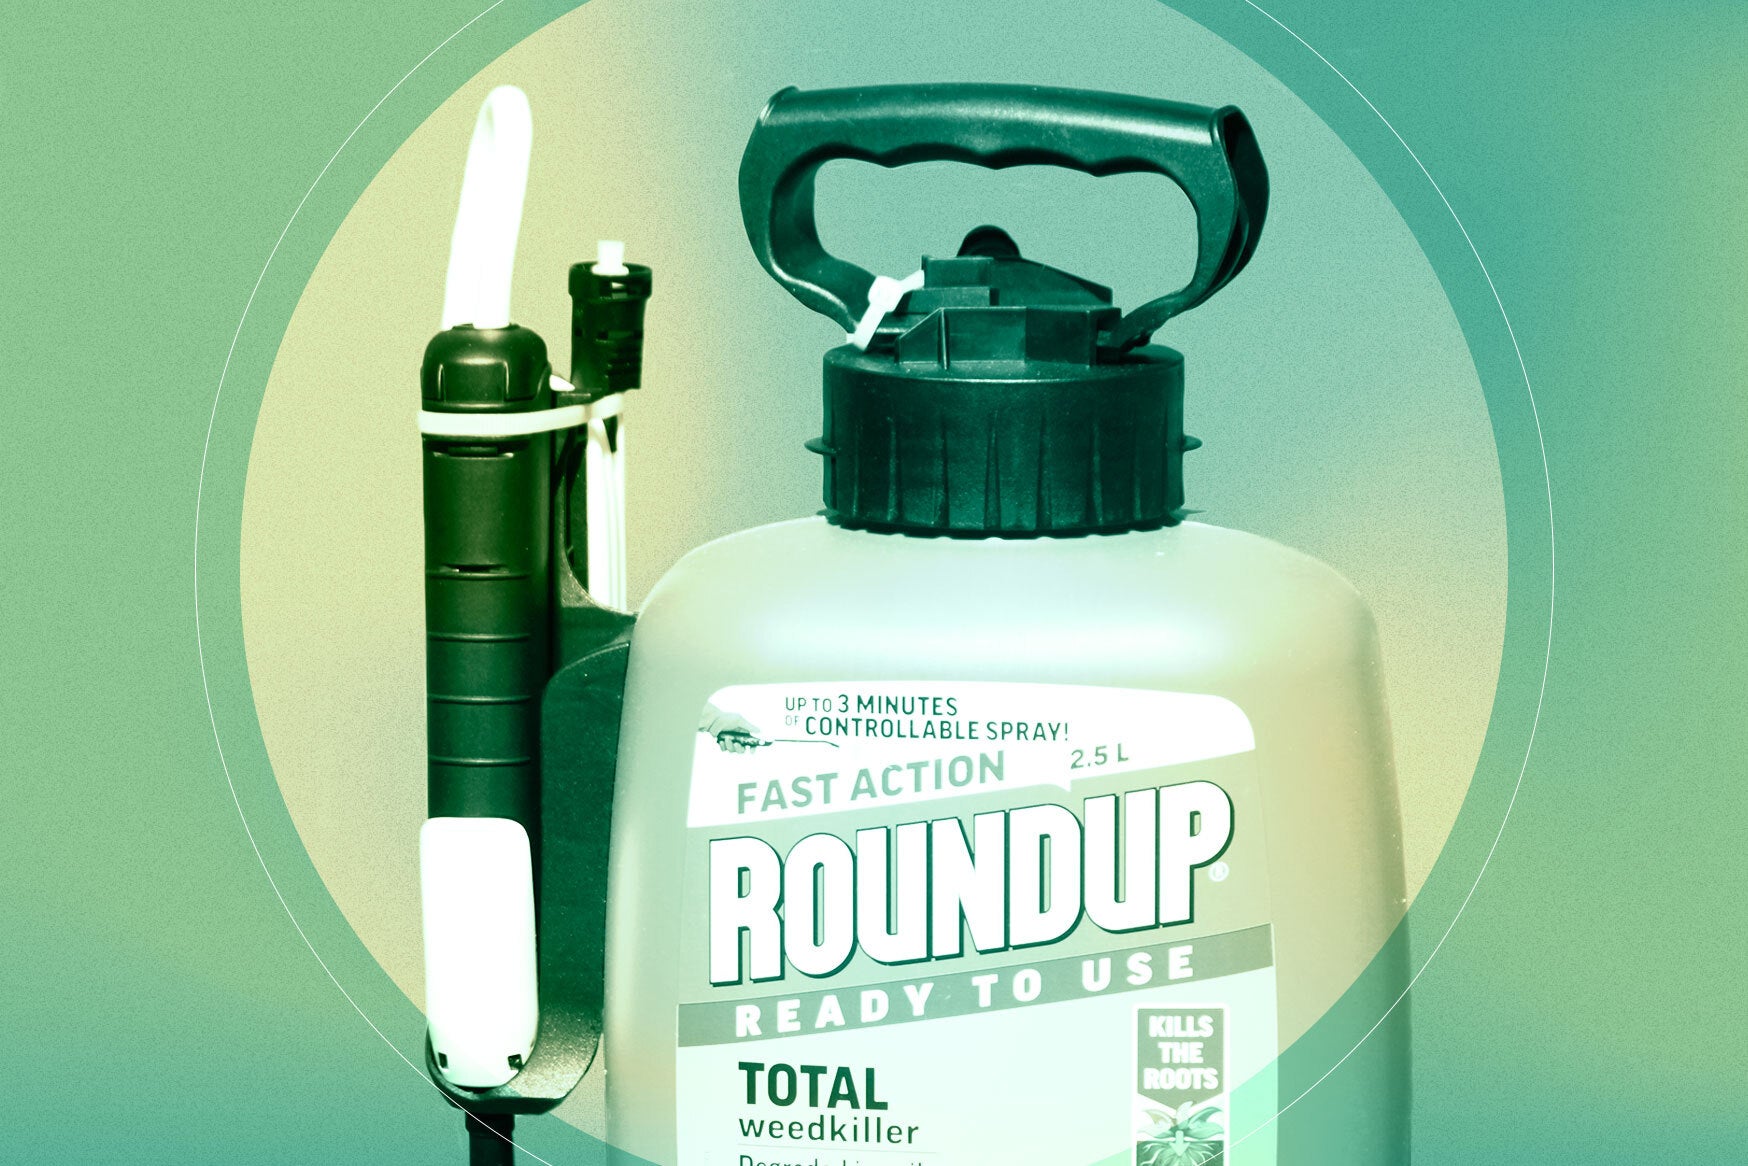 This Roundup ingredient could cause cancer, but the EPA won’t ban it thumbnail